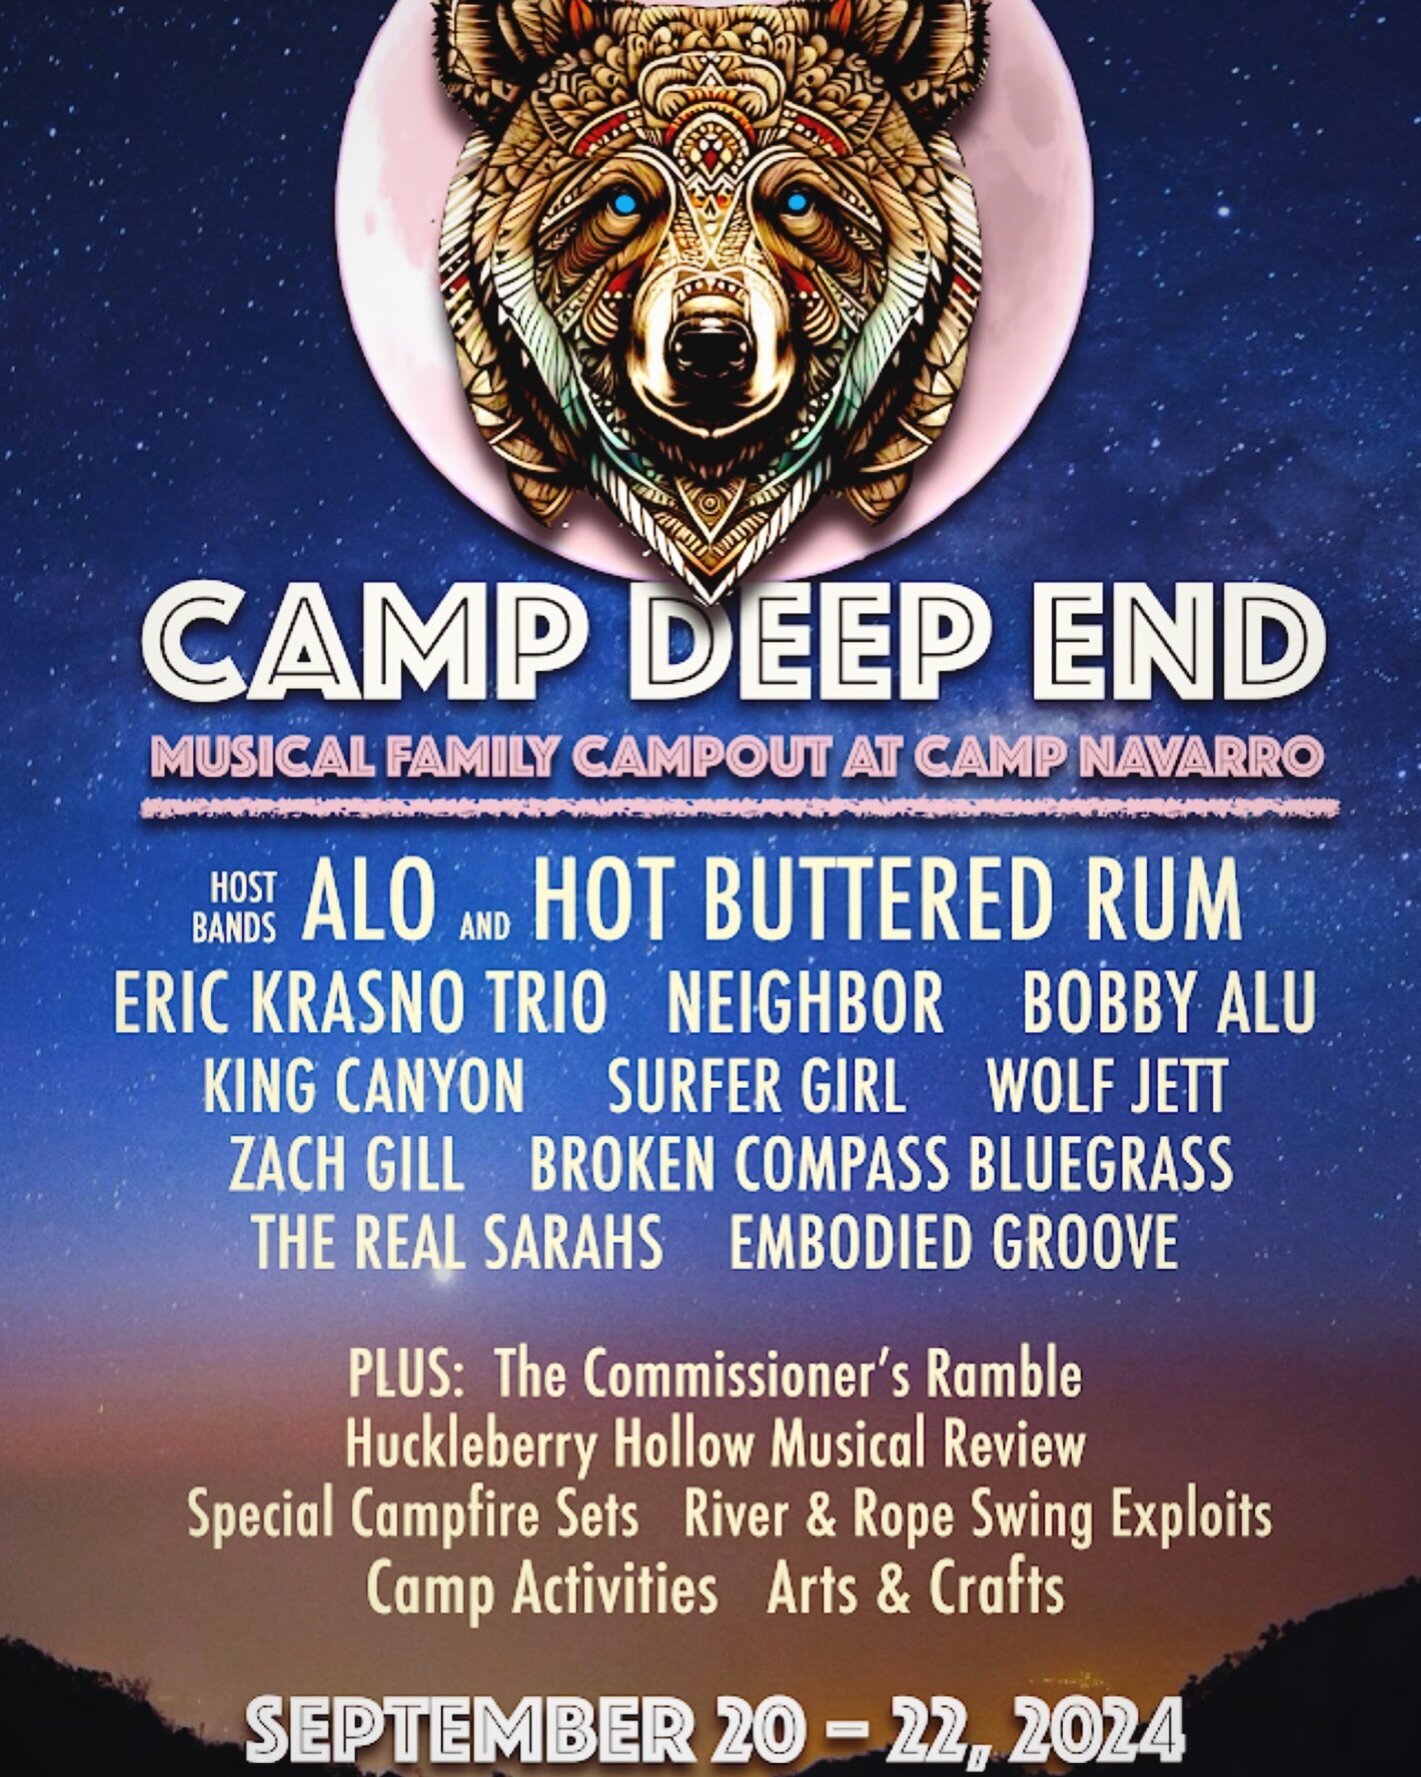 Can&rsquo;t wait to get back to the Deep End! Camp Deep End is such a special festival to me and it&rsquo;s been an honor to co-present it every year and to go in deep! Can&rsquo;t wait to do it again! ❤️ Tix on sale tomorrow (Tuesday) at noon! See y